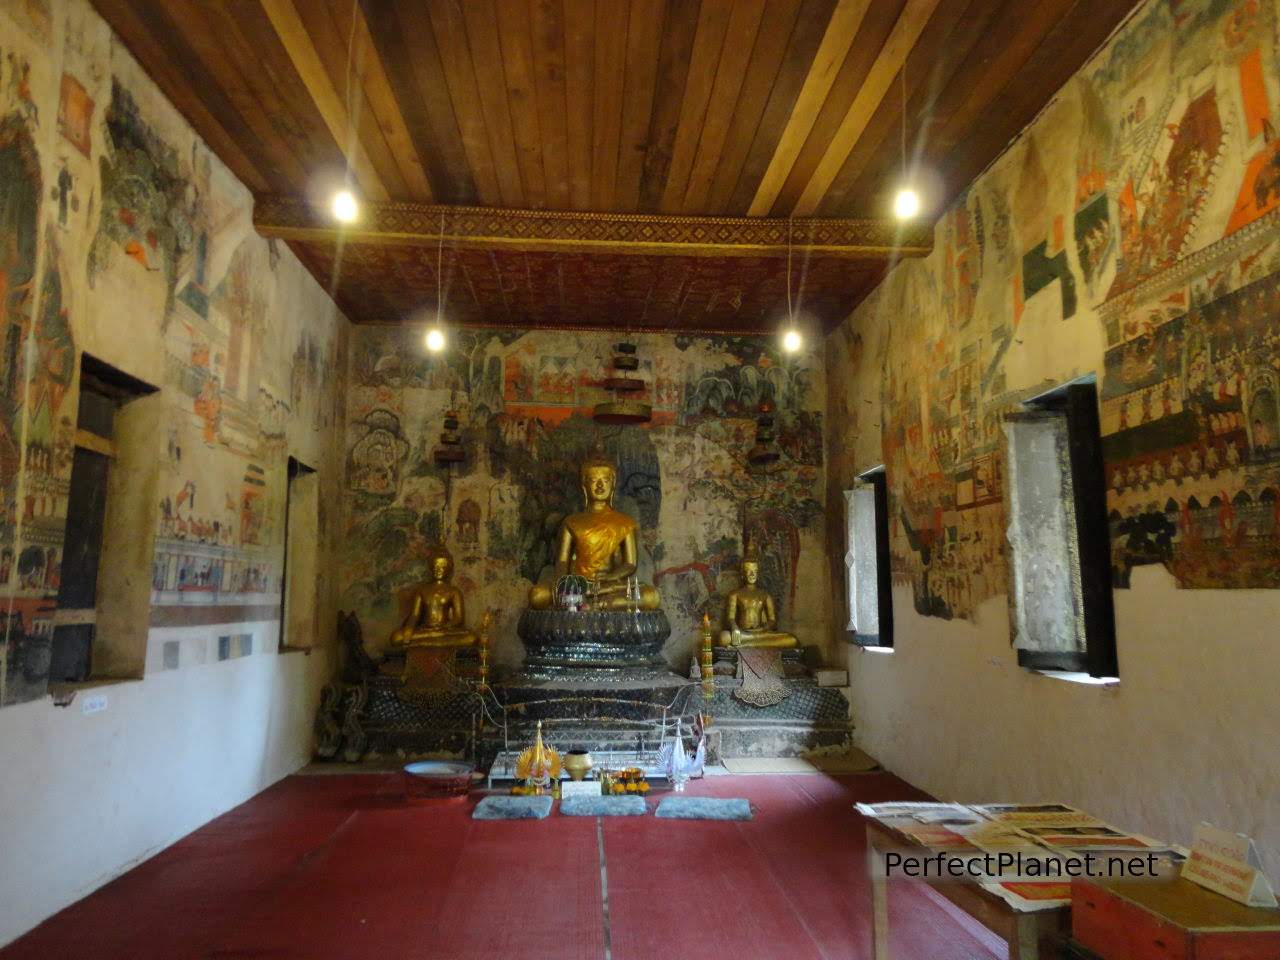 Interior of a Temple